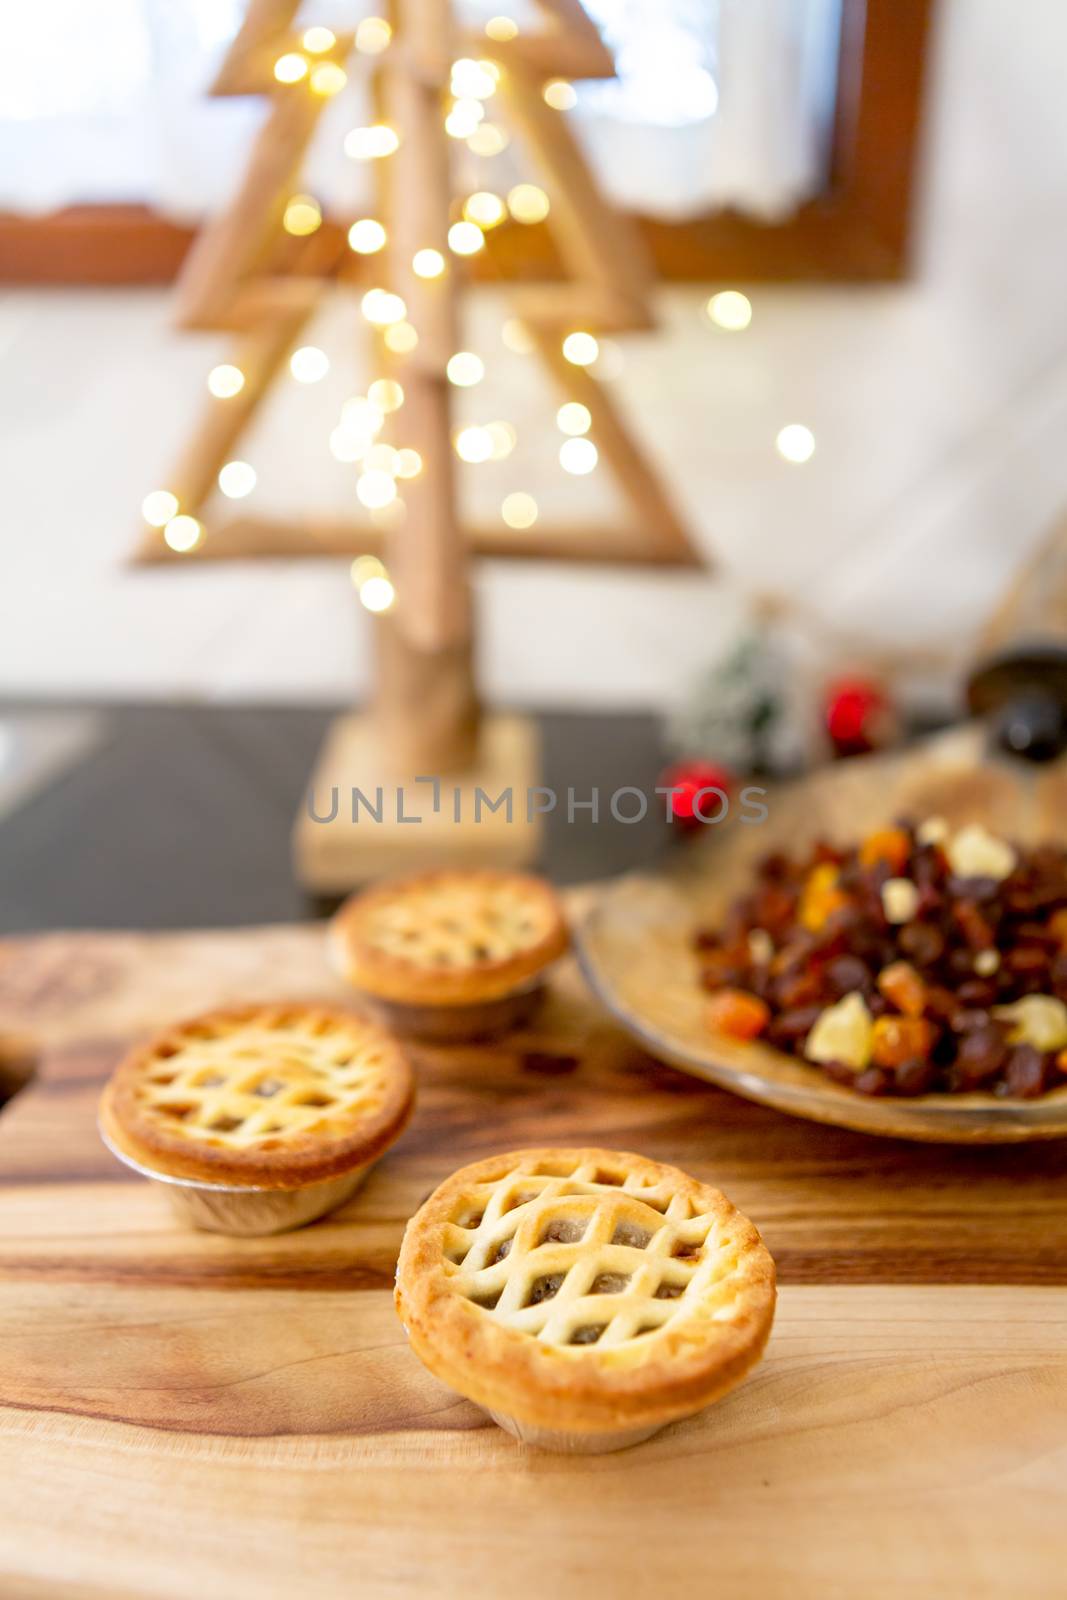 Christmas baking - fruit mince tarts by lovleah